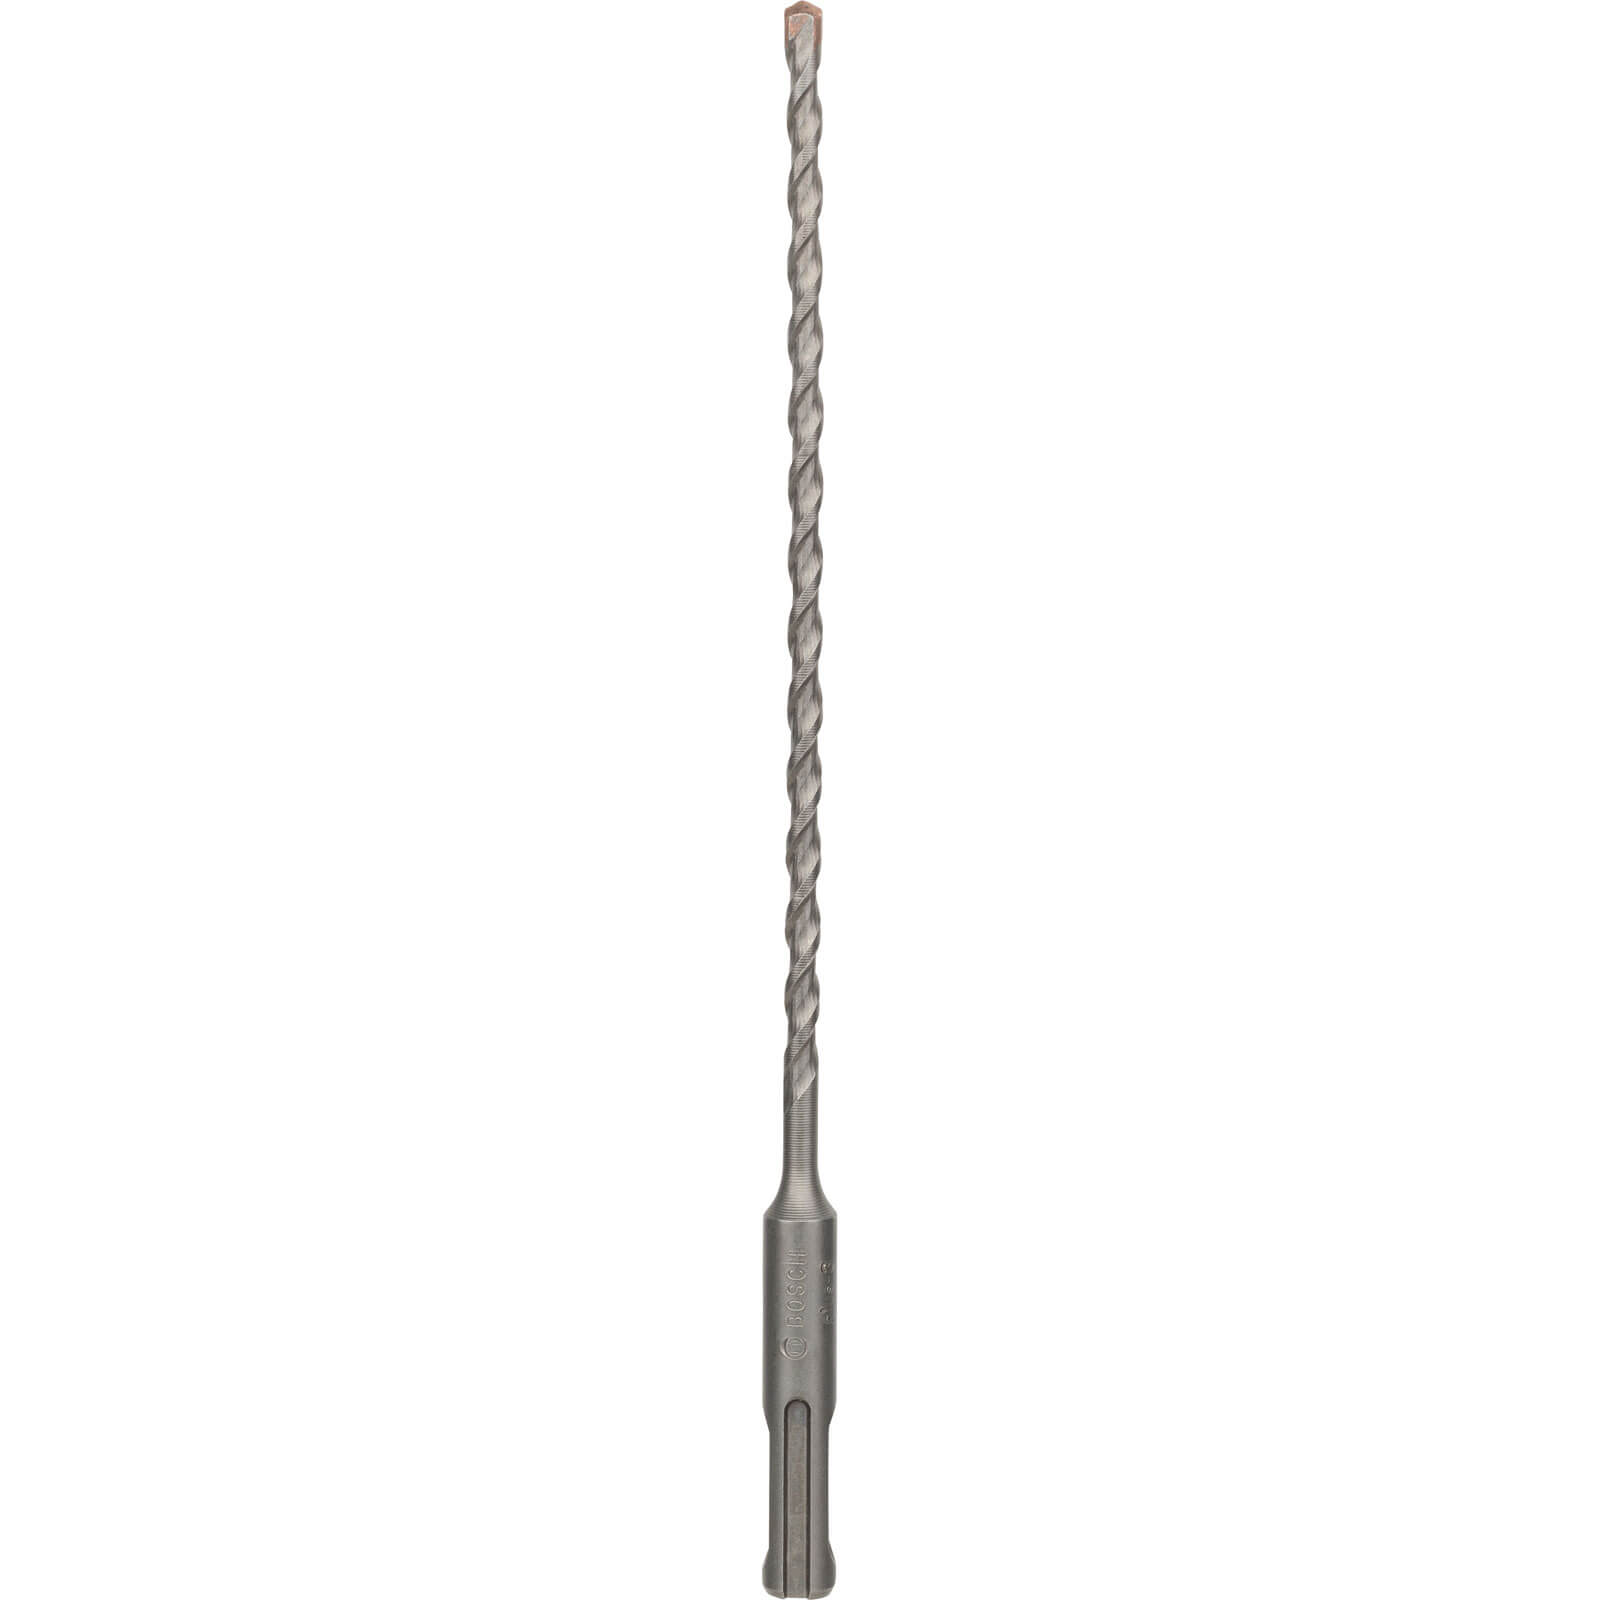 Image of Bosch Series 3 SDS Plus Masonry Drill Bit 5mm 210mm Pack of 1